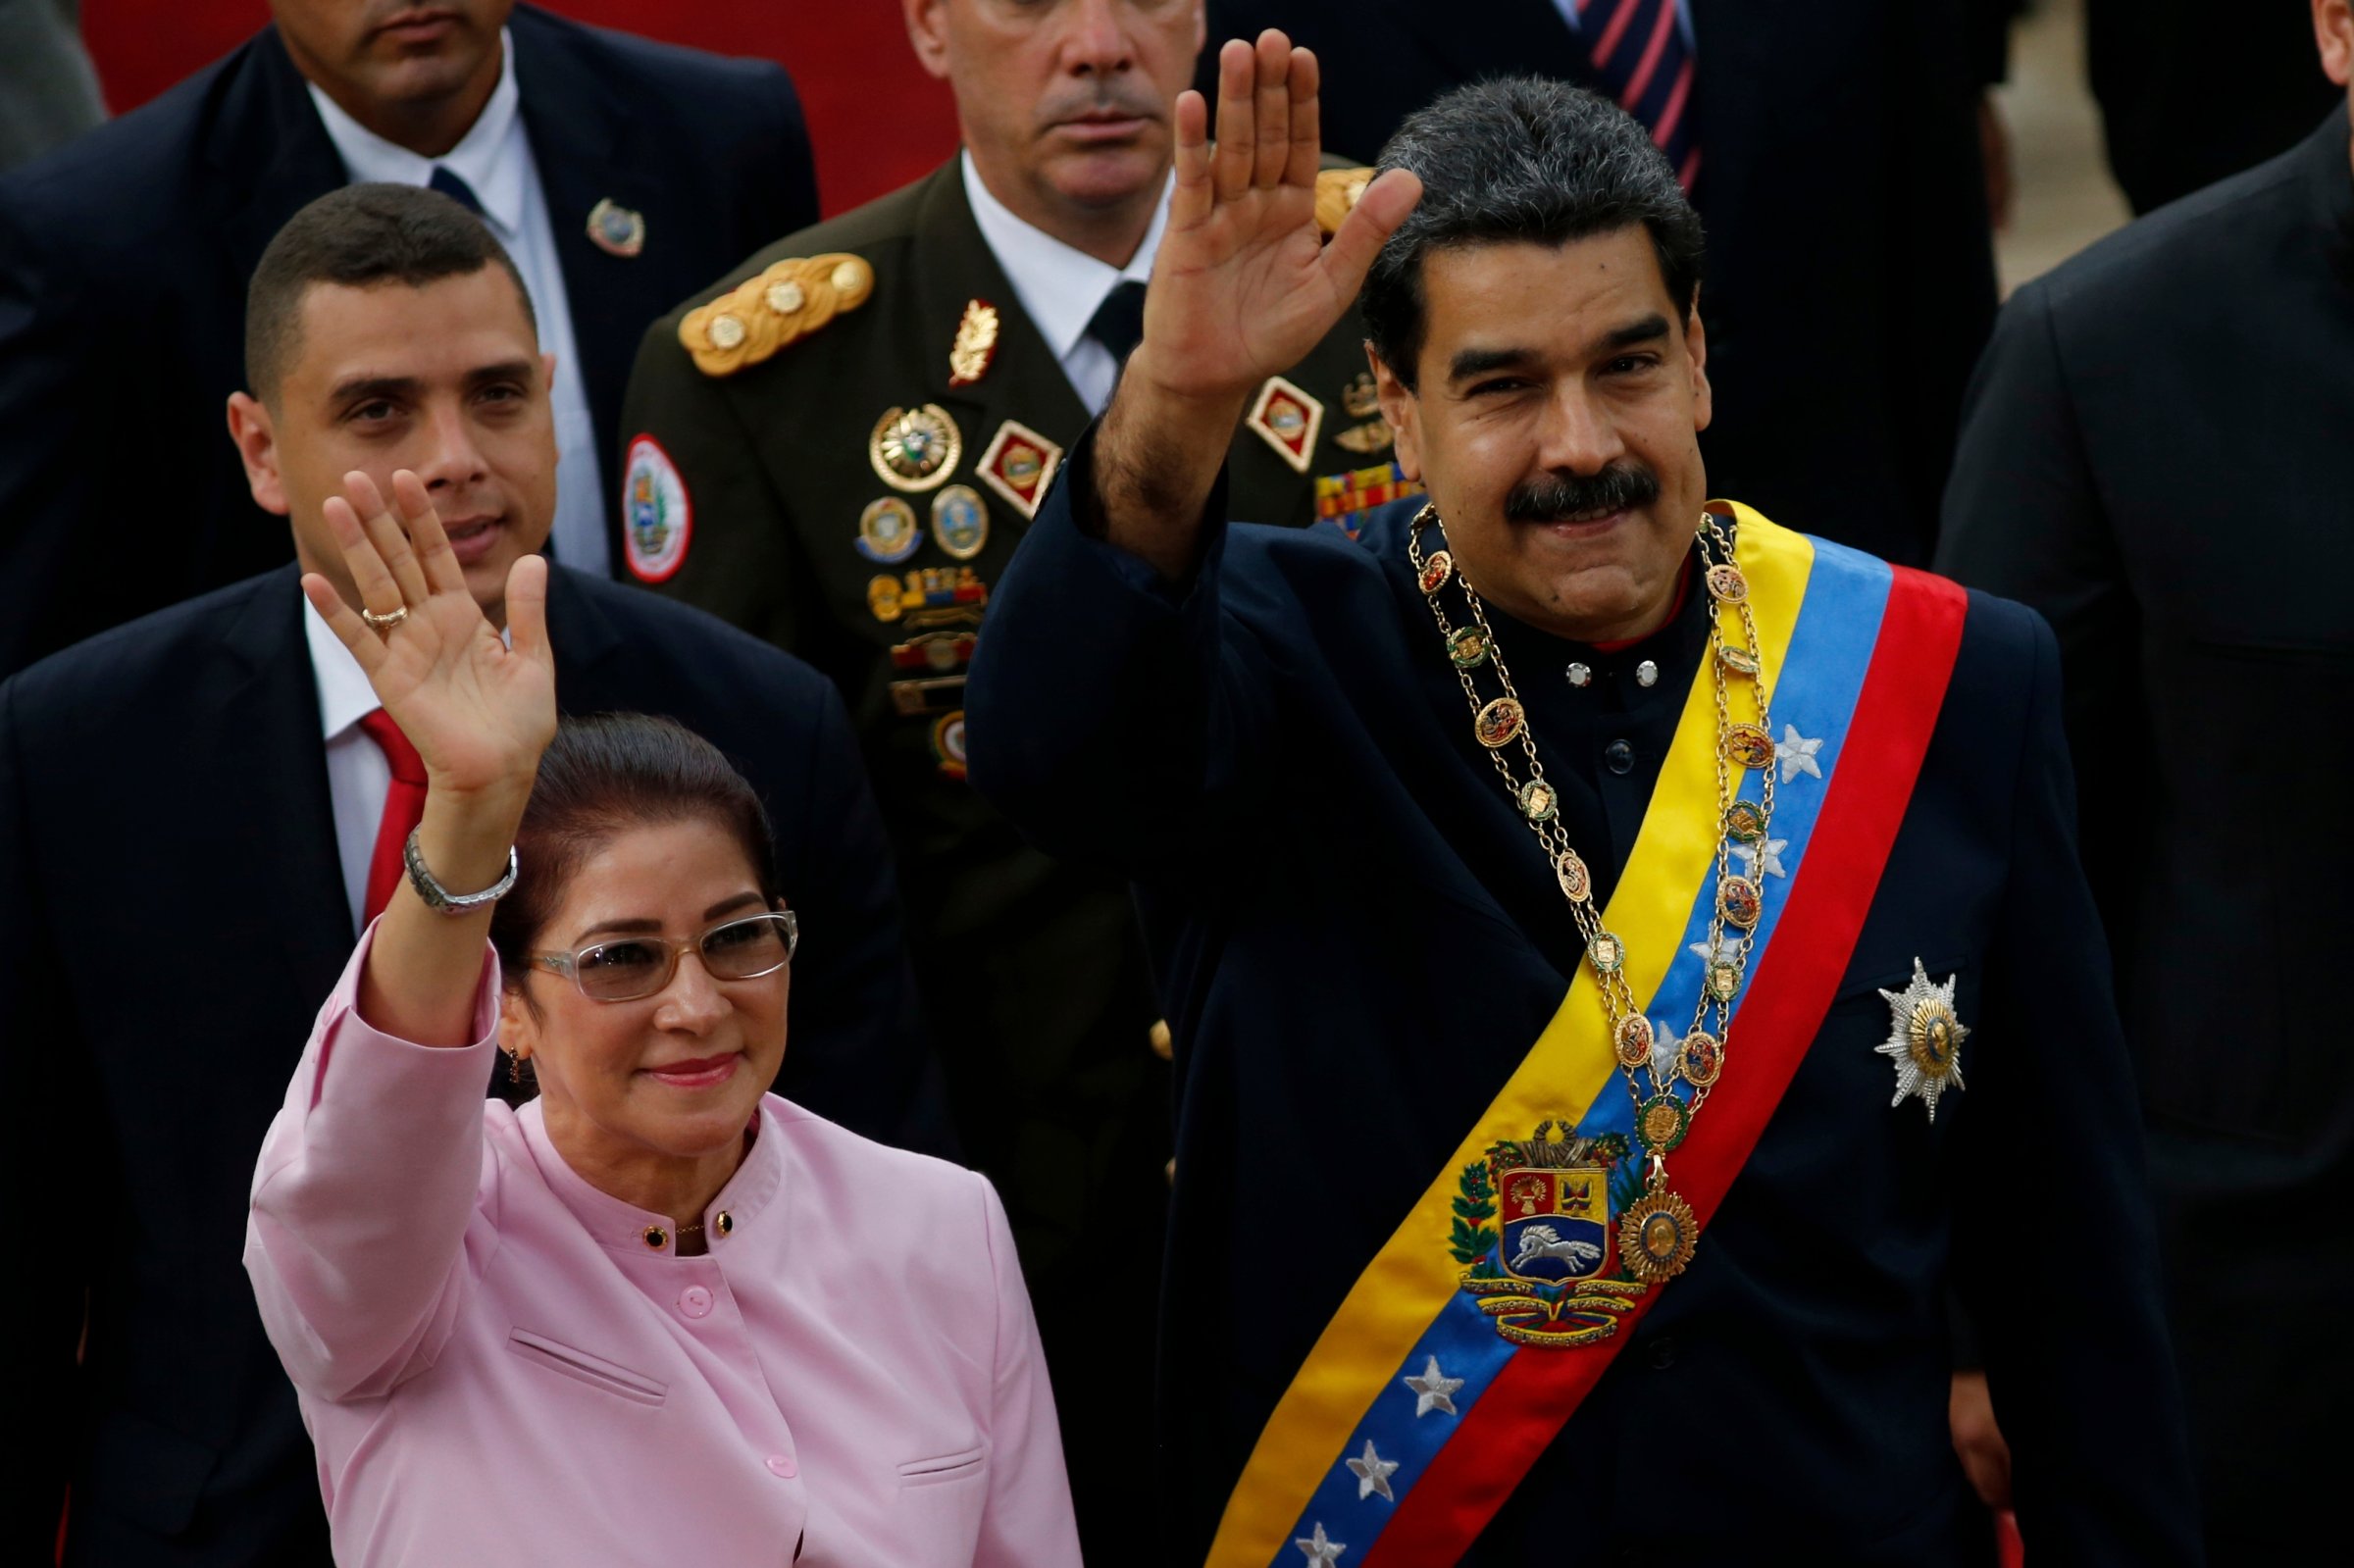 Venezuela's President Nicolas Maduro, right, and his wife Cilia Flores wave as they arrive to the National Assembly building for a session of the Constitutional Assembly in Caracas, Venezuela, Aug. 10, 2017.